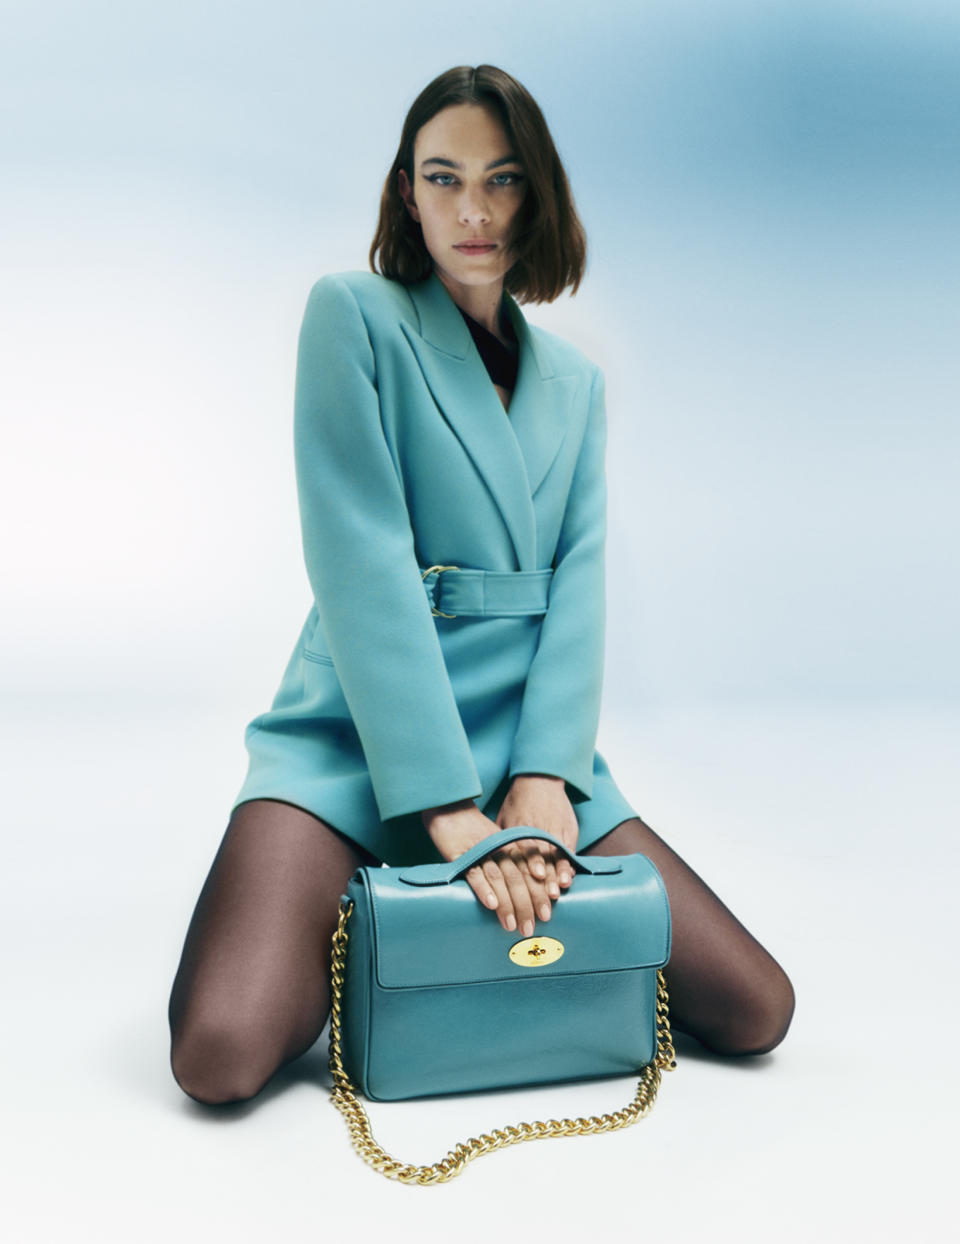 Mulberry x Alexa Chung - Credit: Courtesy of Mullberry